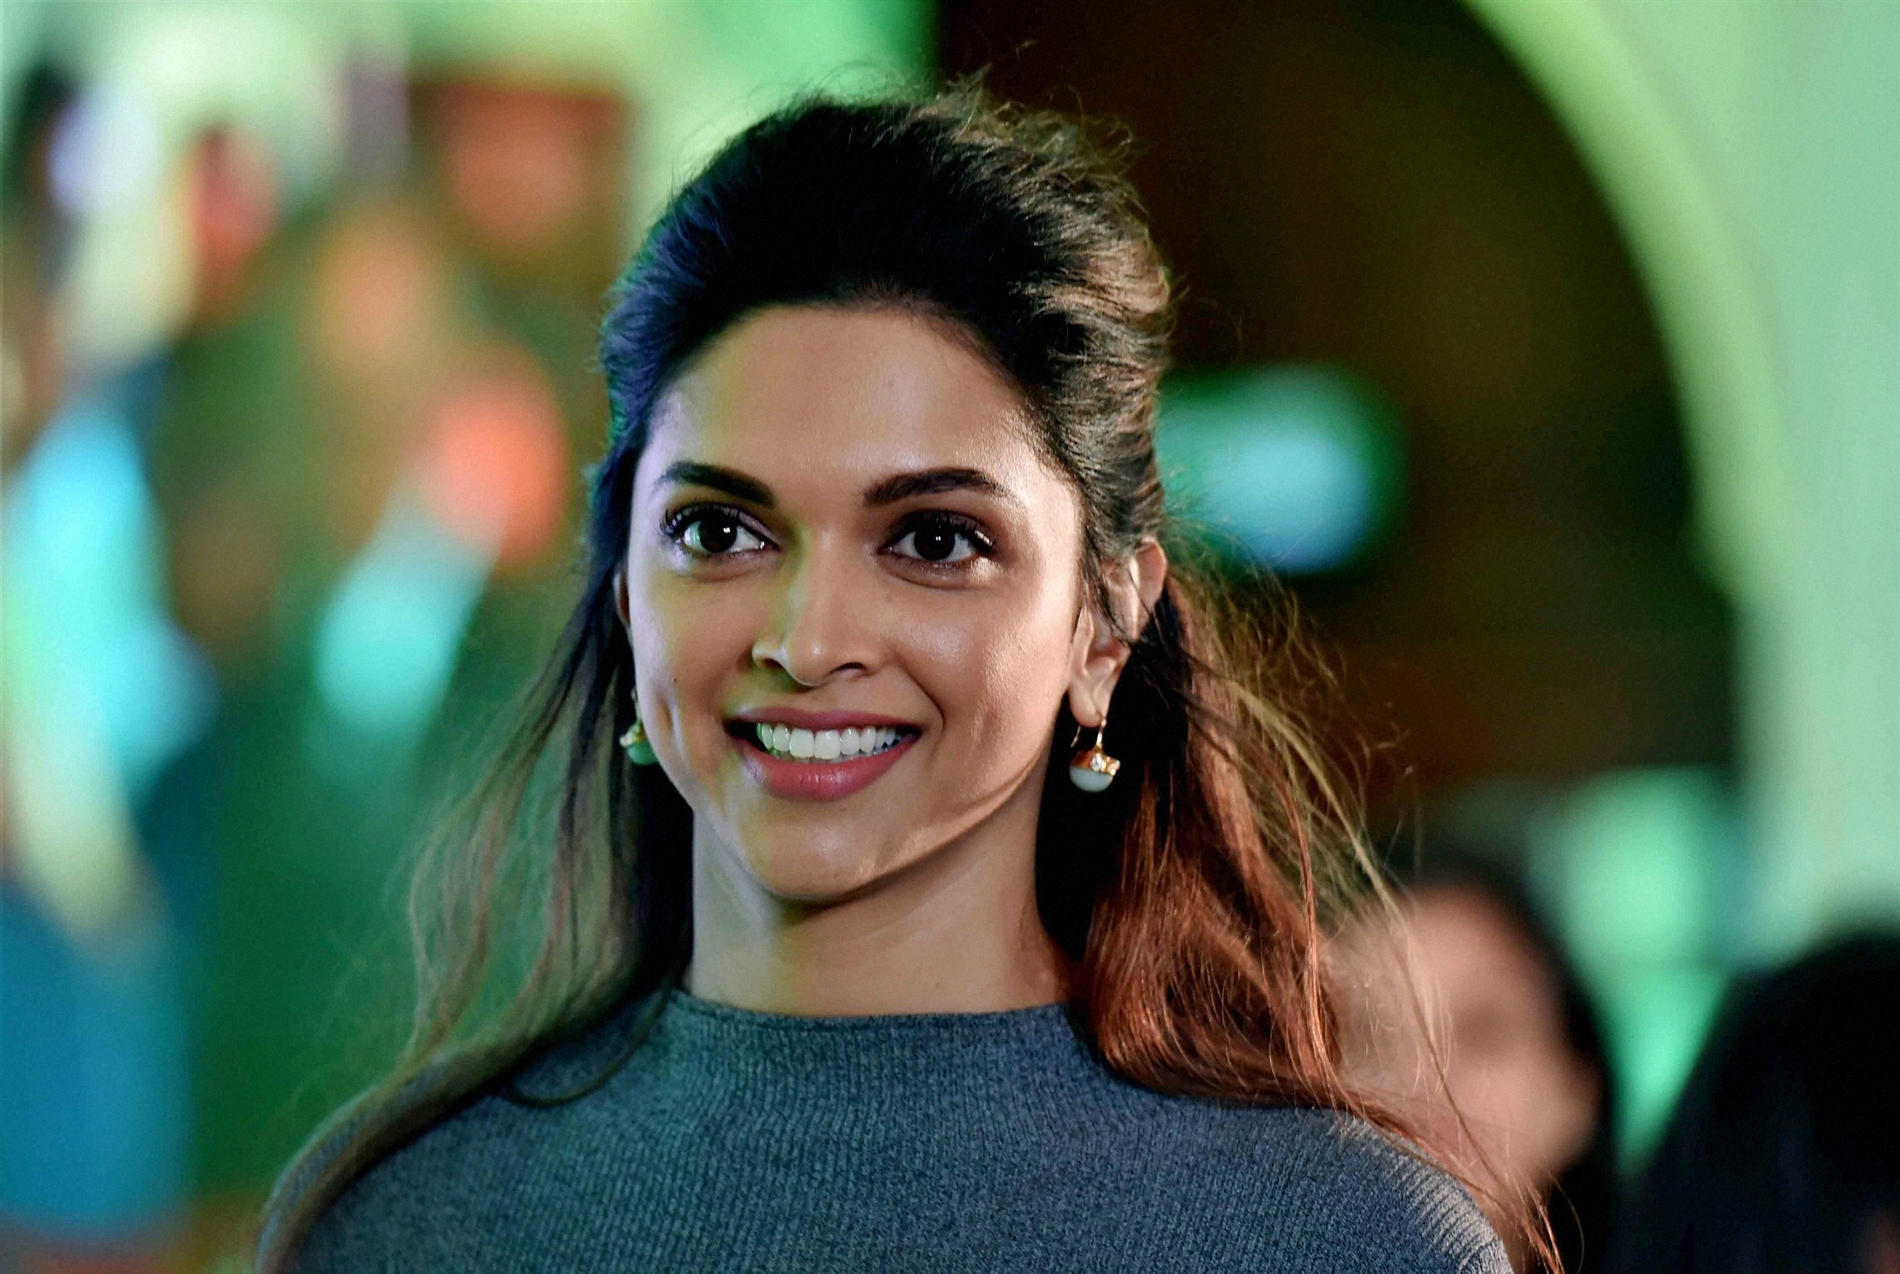 Biggest learning was not to prepare for 'Ram-leela': Deepika